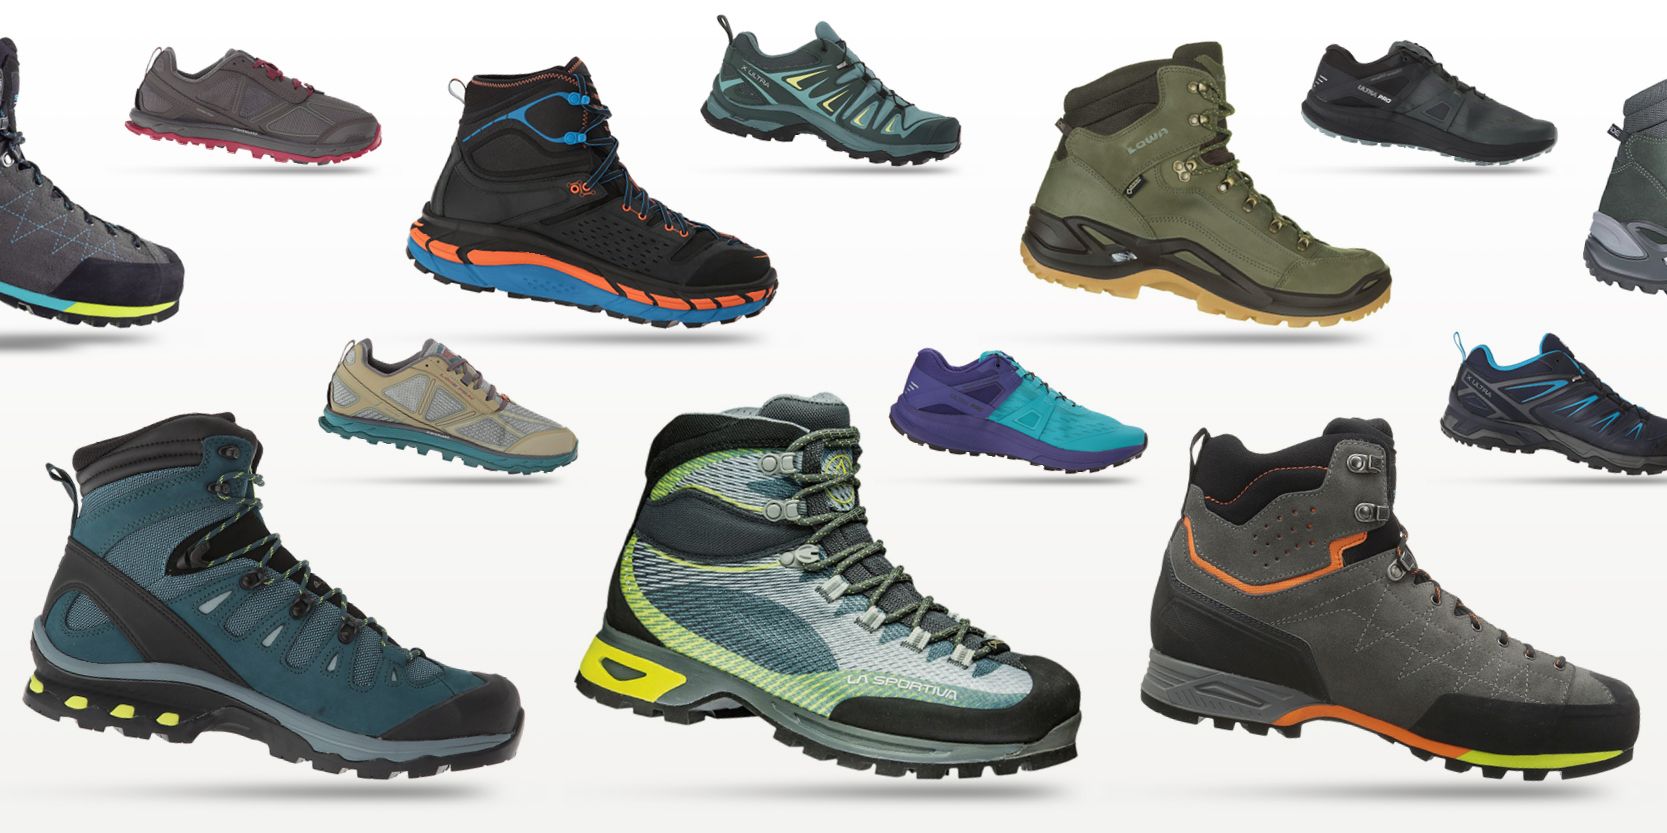 Best Hiking Boots 2020 | Hiking Boot 